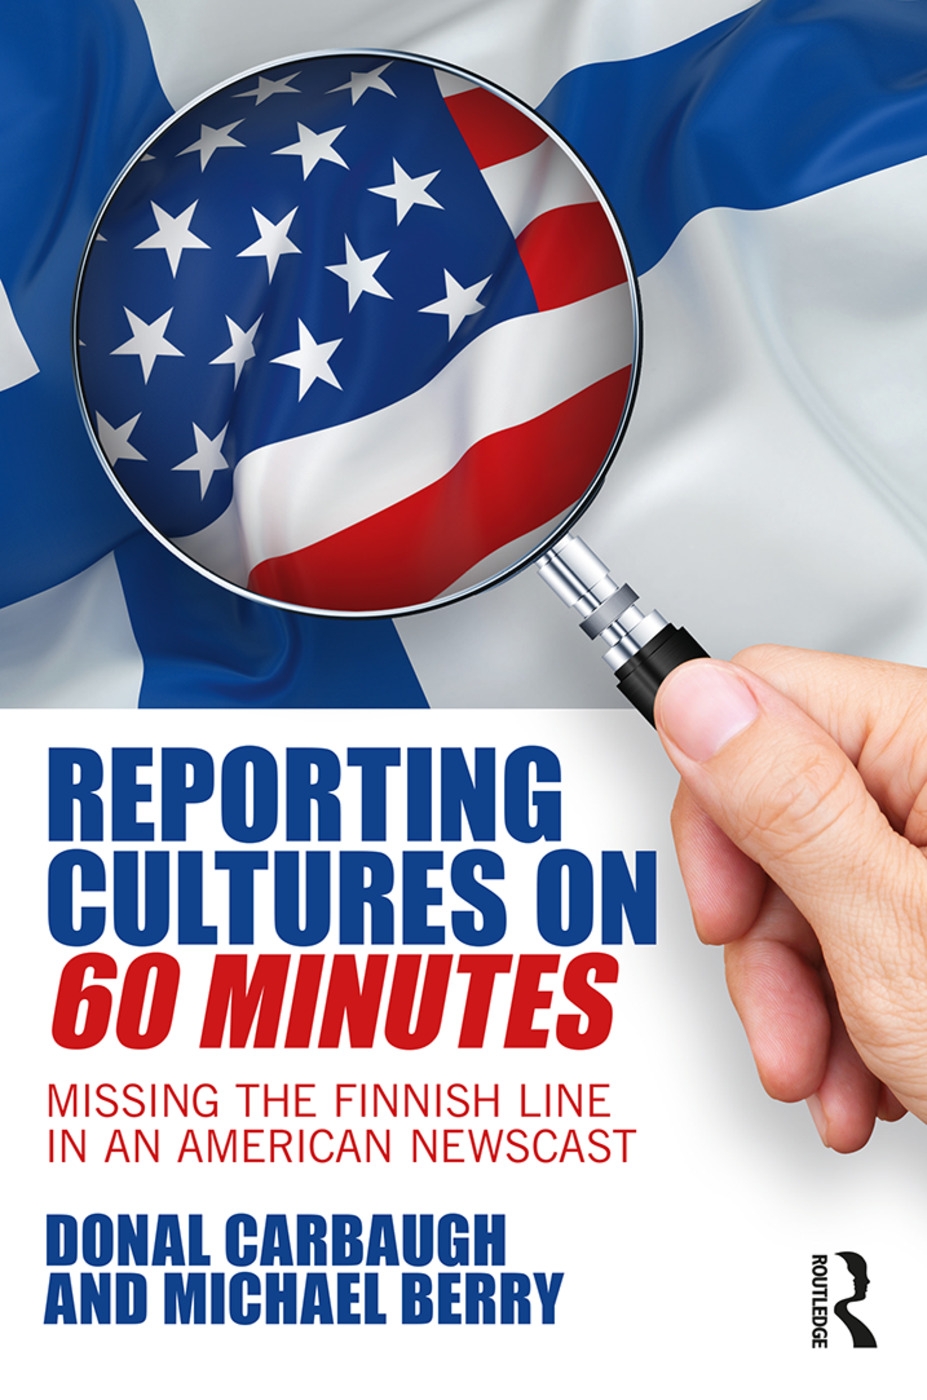 Reporting Cultures on 60 Minutes: Missing the Finnish Line in an American Newscast